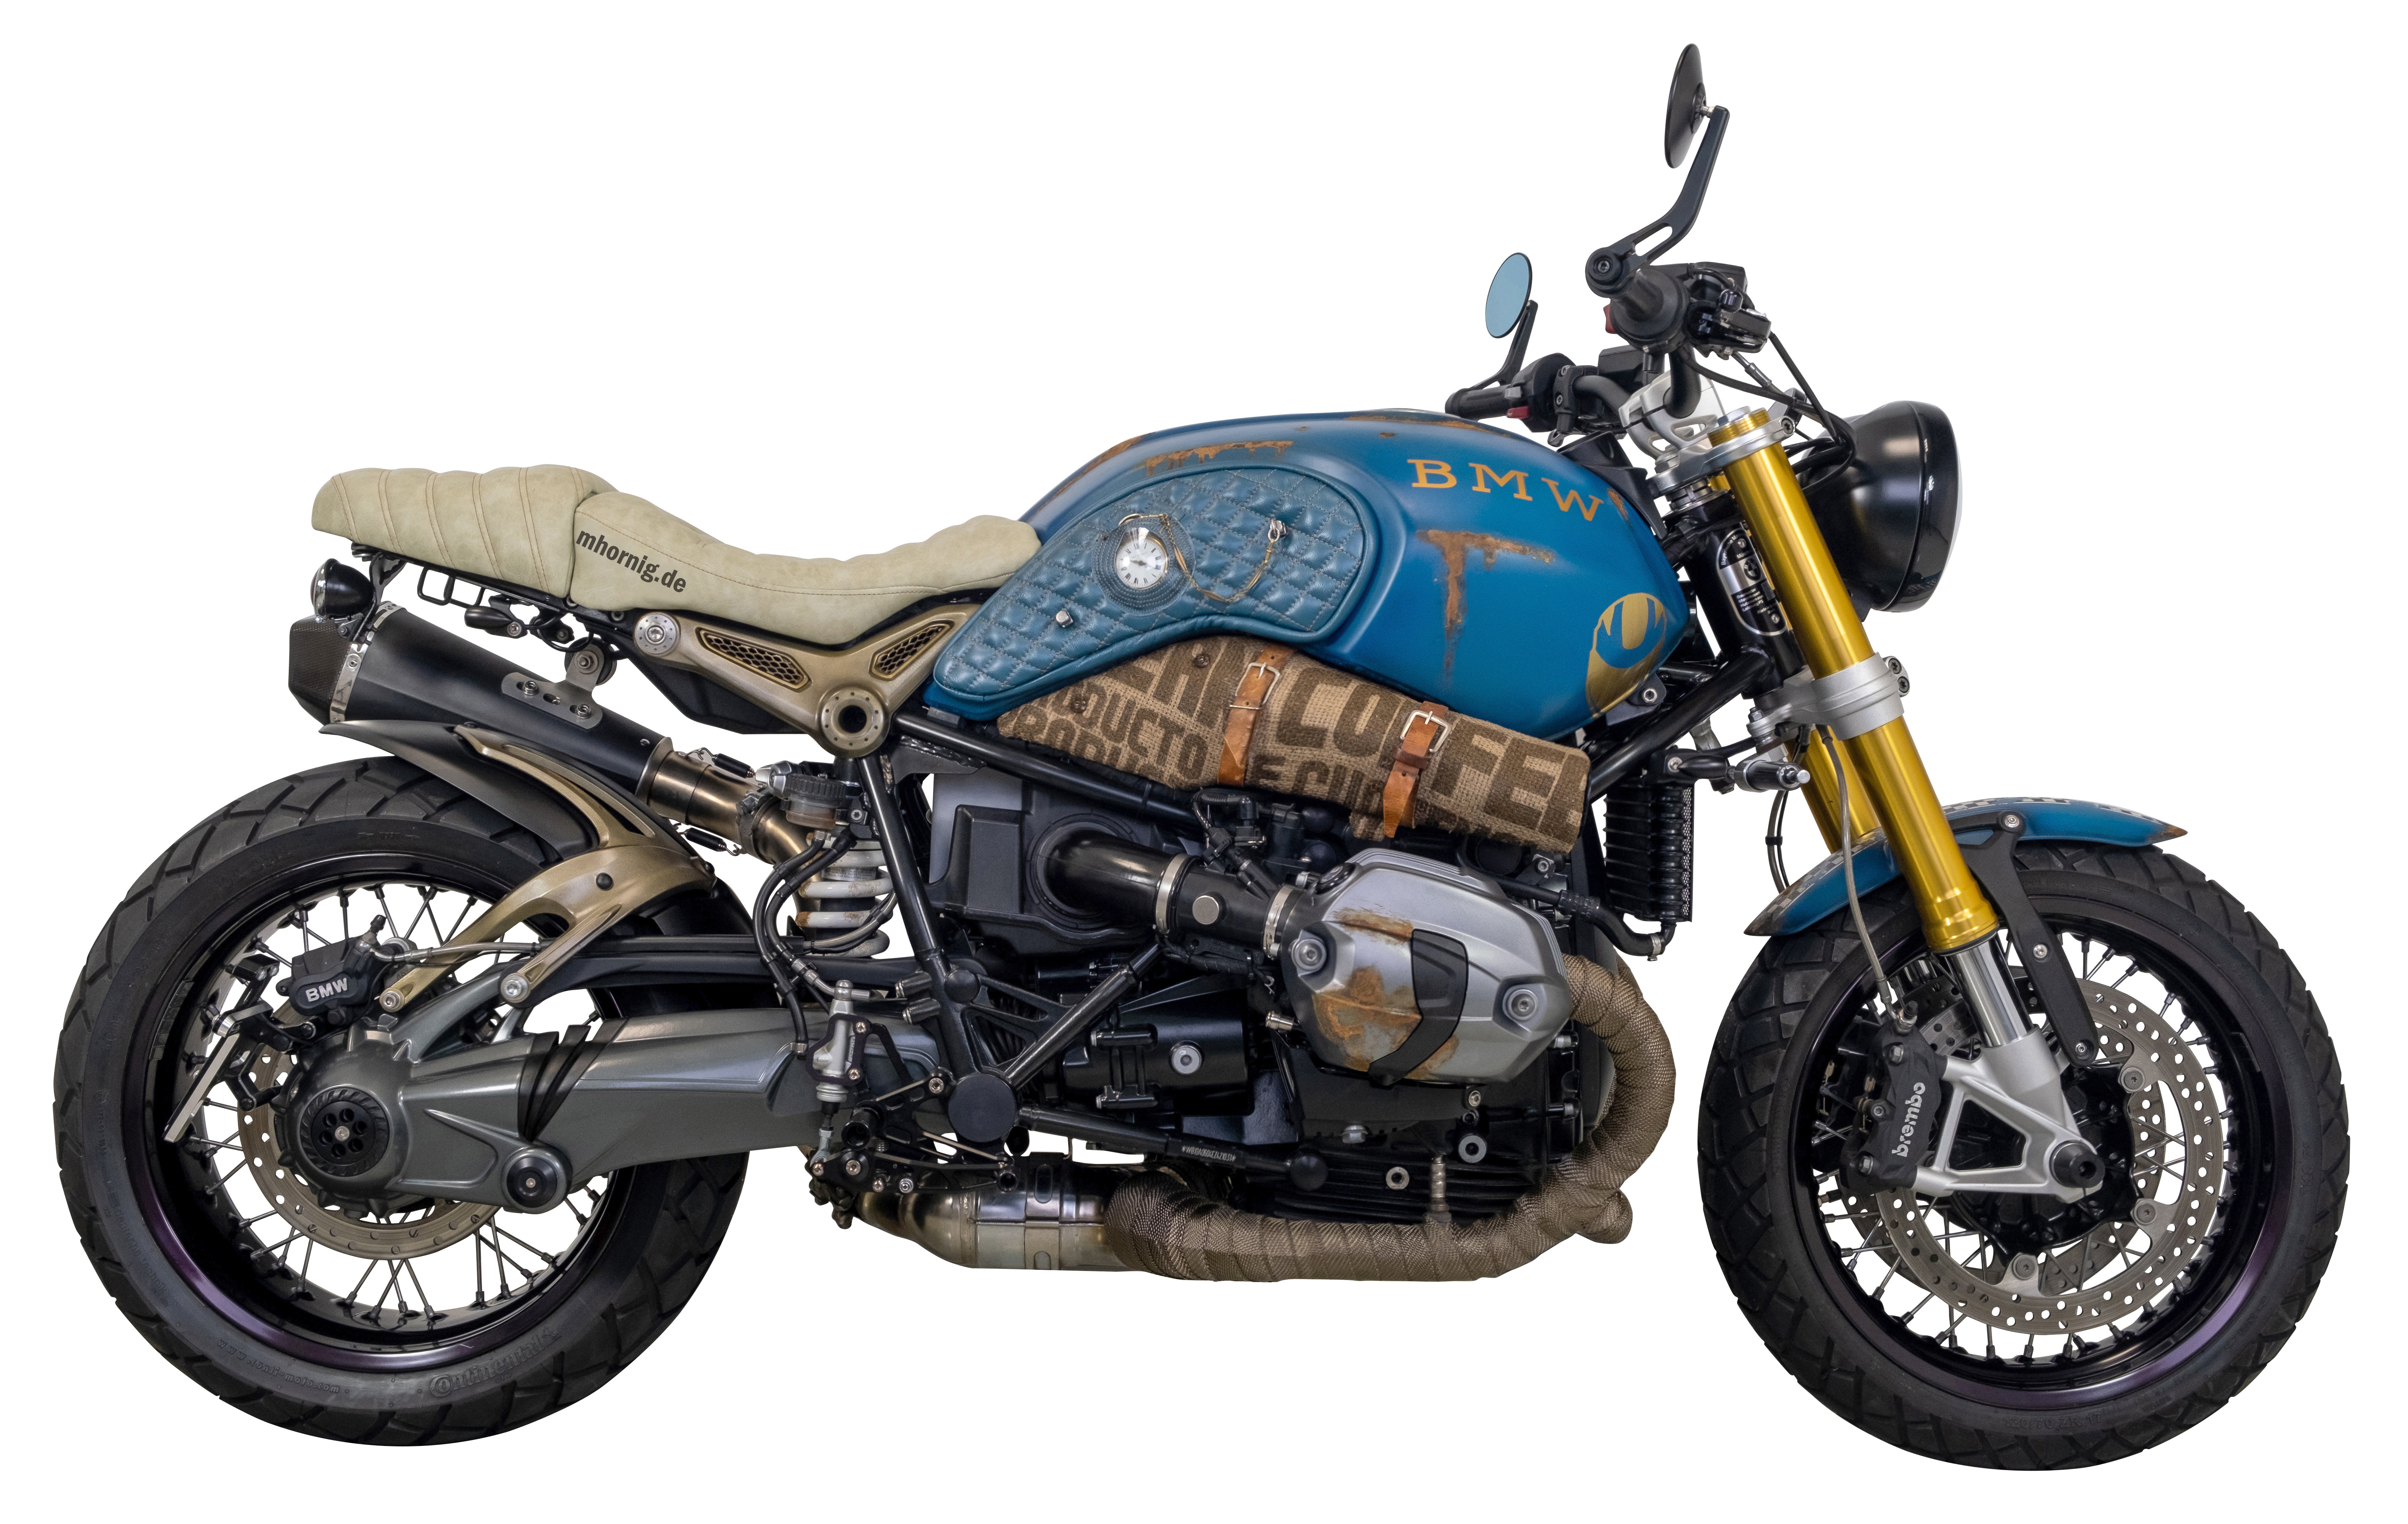 BMW RnineT conversion by Hornig unique old school look for the Heritage  roadster, Motorcycle Accessory Hornig